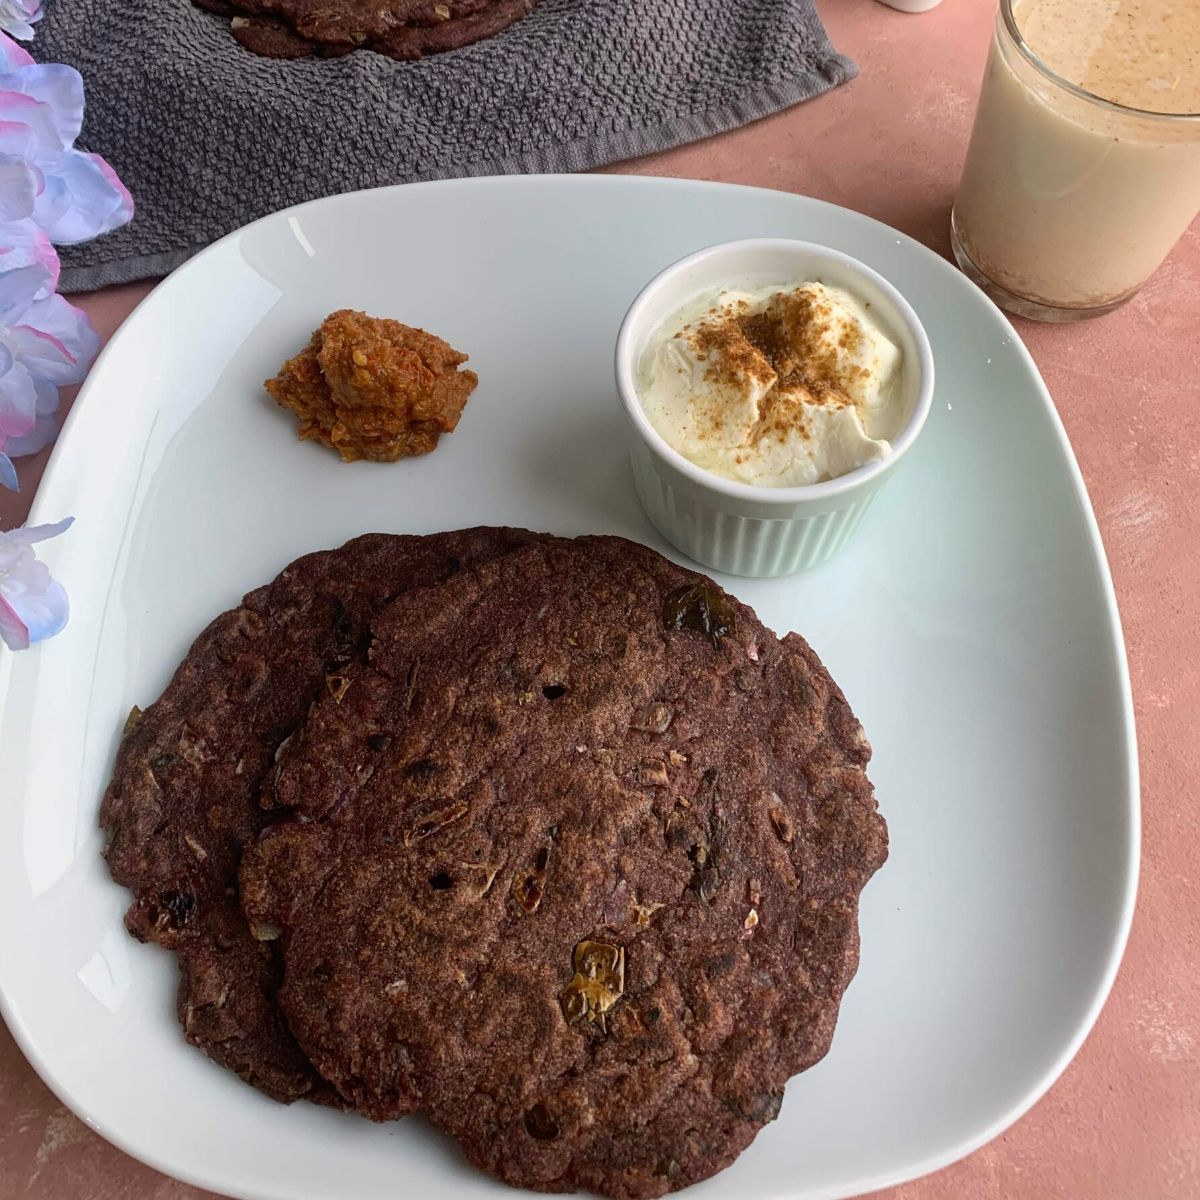 Ragi Roti or Finger Millet Flatbread is a Gluten free and Vegan flatbread made using the Ragi flour or Nachni and is generally served for breakfast.